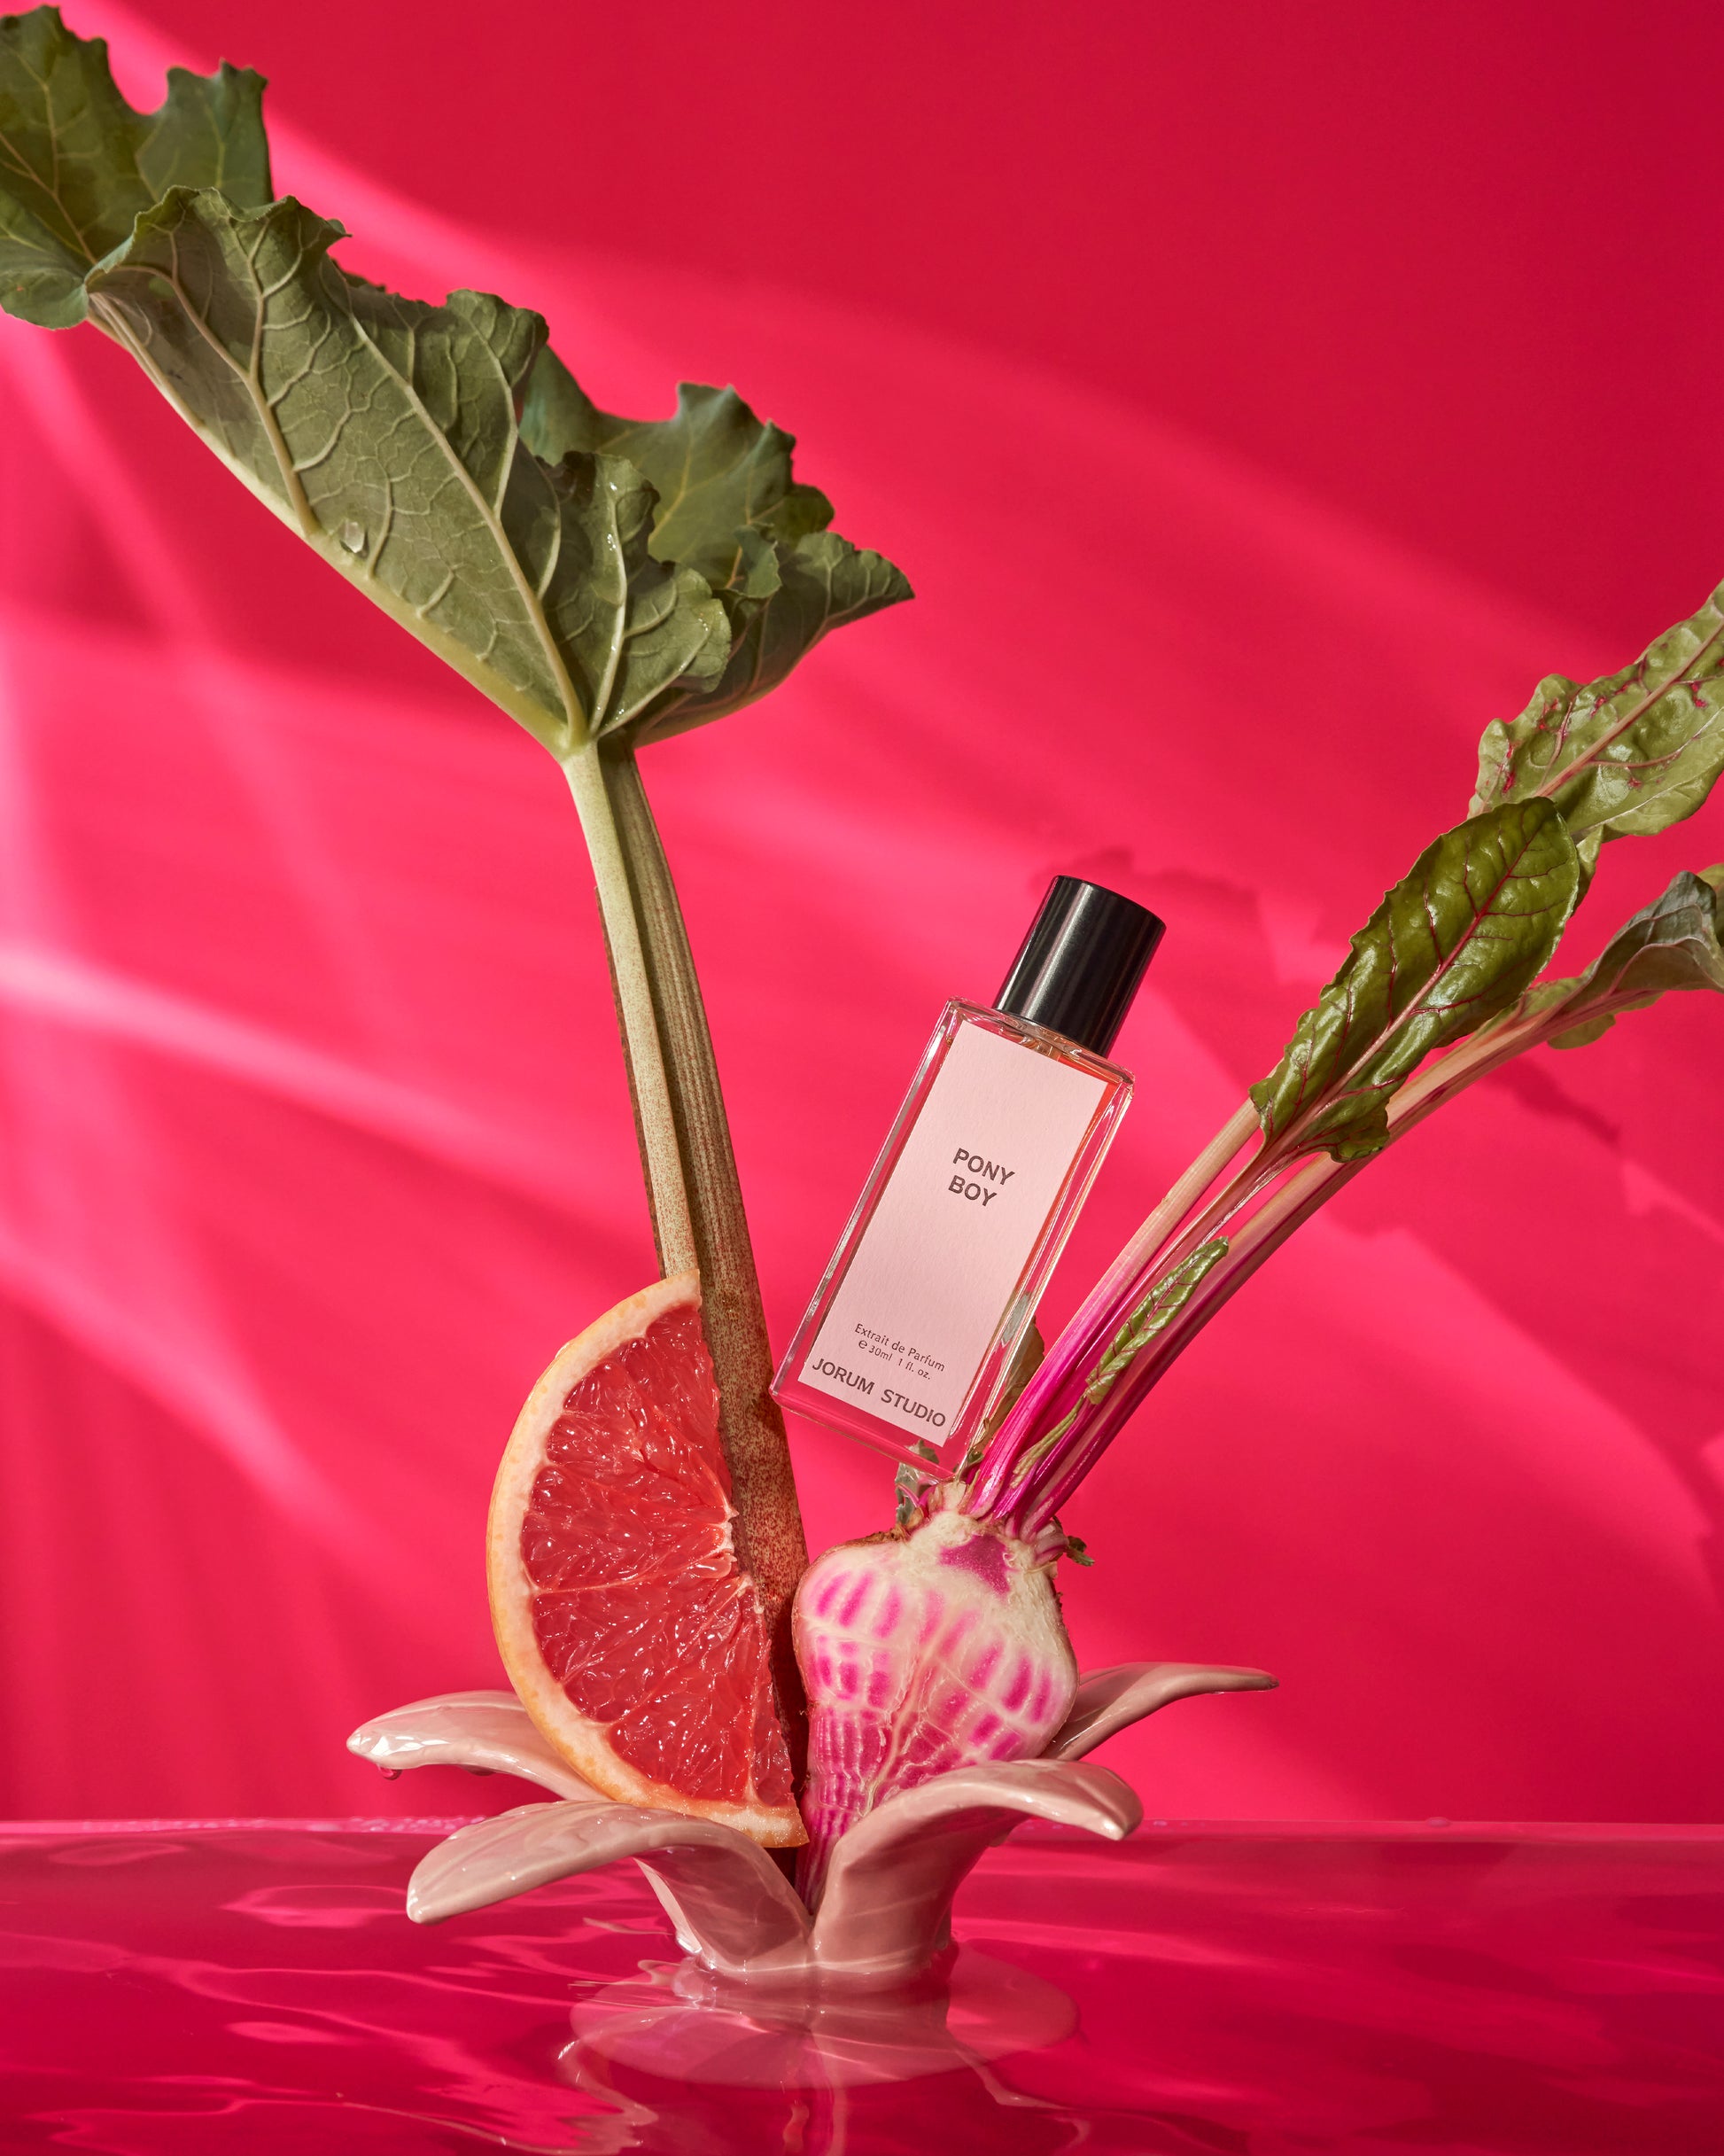 Jorum Studio Pony Boy perfume bottle arranged in a still-life featuring rhubarb stalks, a grapefruit wedge, sliced beetroot against a watery hot pink background